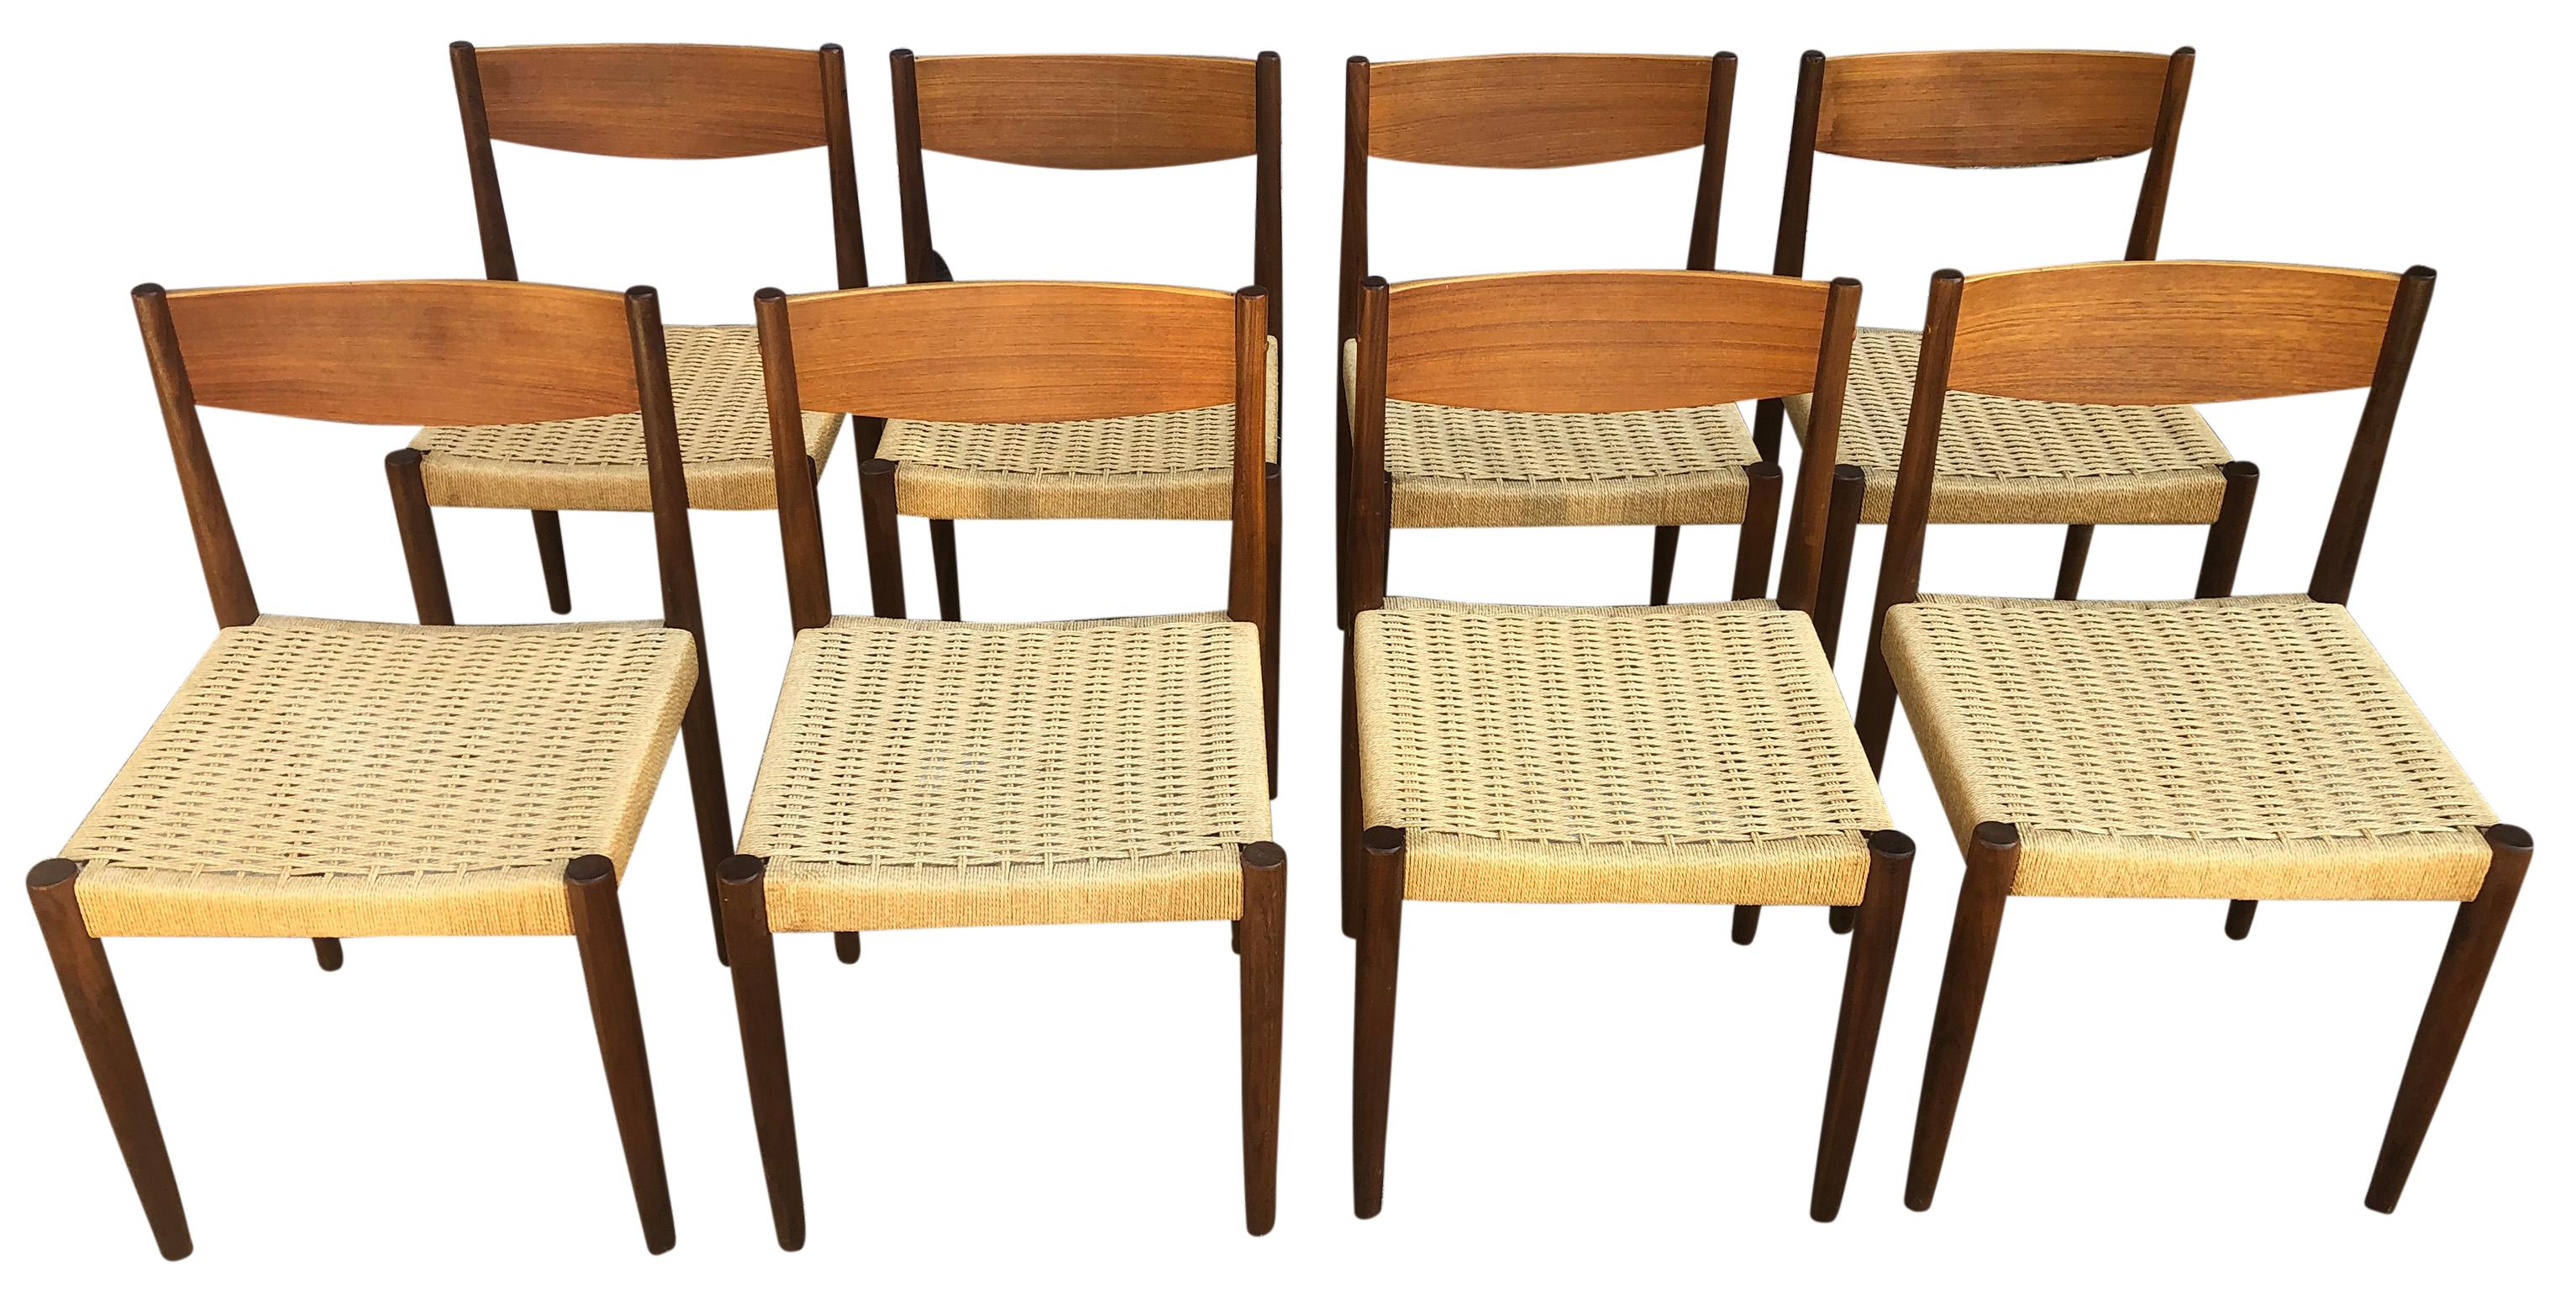 Eight Beautiful teak Papercord dining chairs for Frem Rojle designed by Poul Volther. This listing is for (8) chairs (1) set. Great Danish design. All chairs are in original vintage condition. All matching original Papercord seats. These chairs are